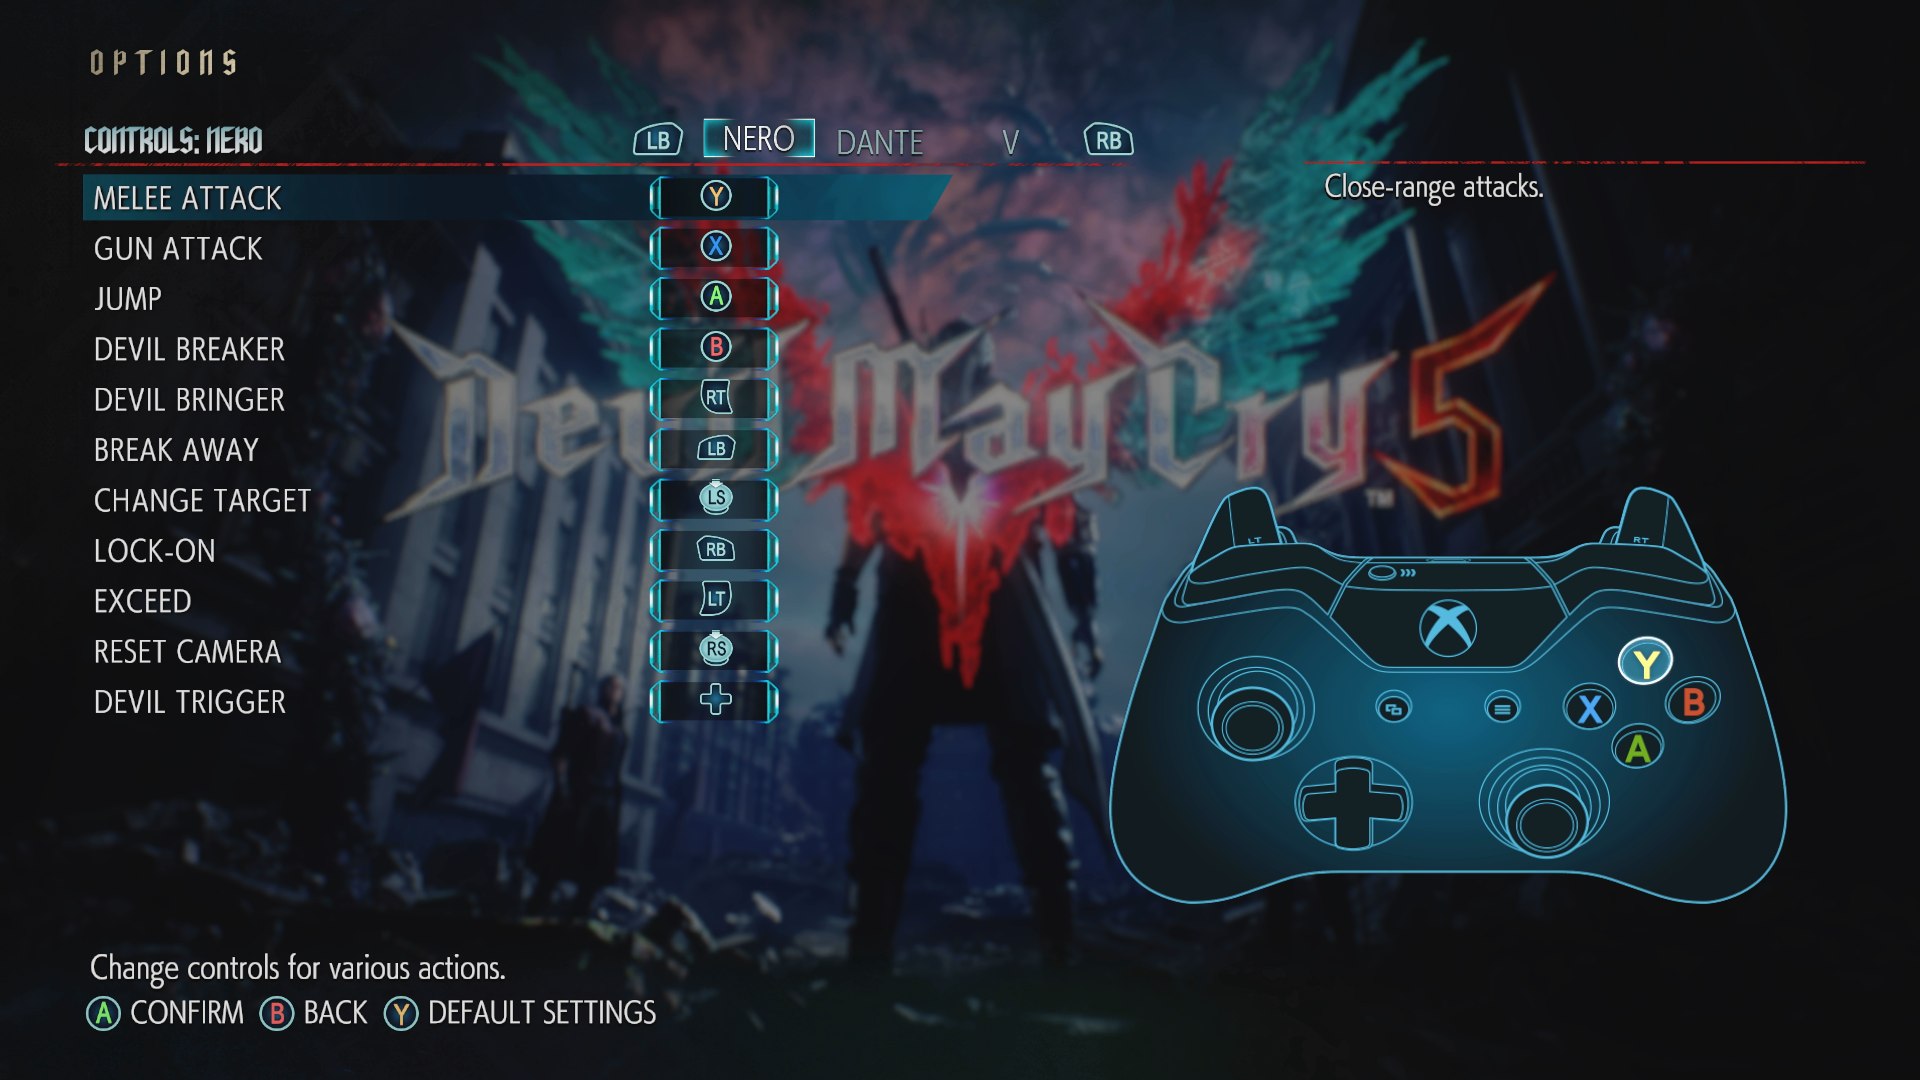 Devil may cry 5 change language russian to english download